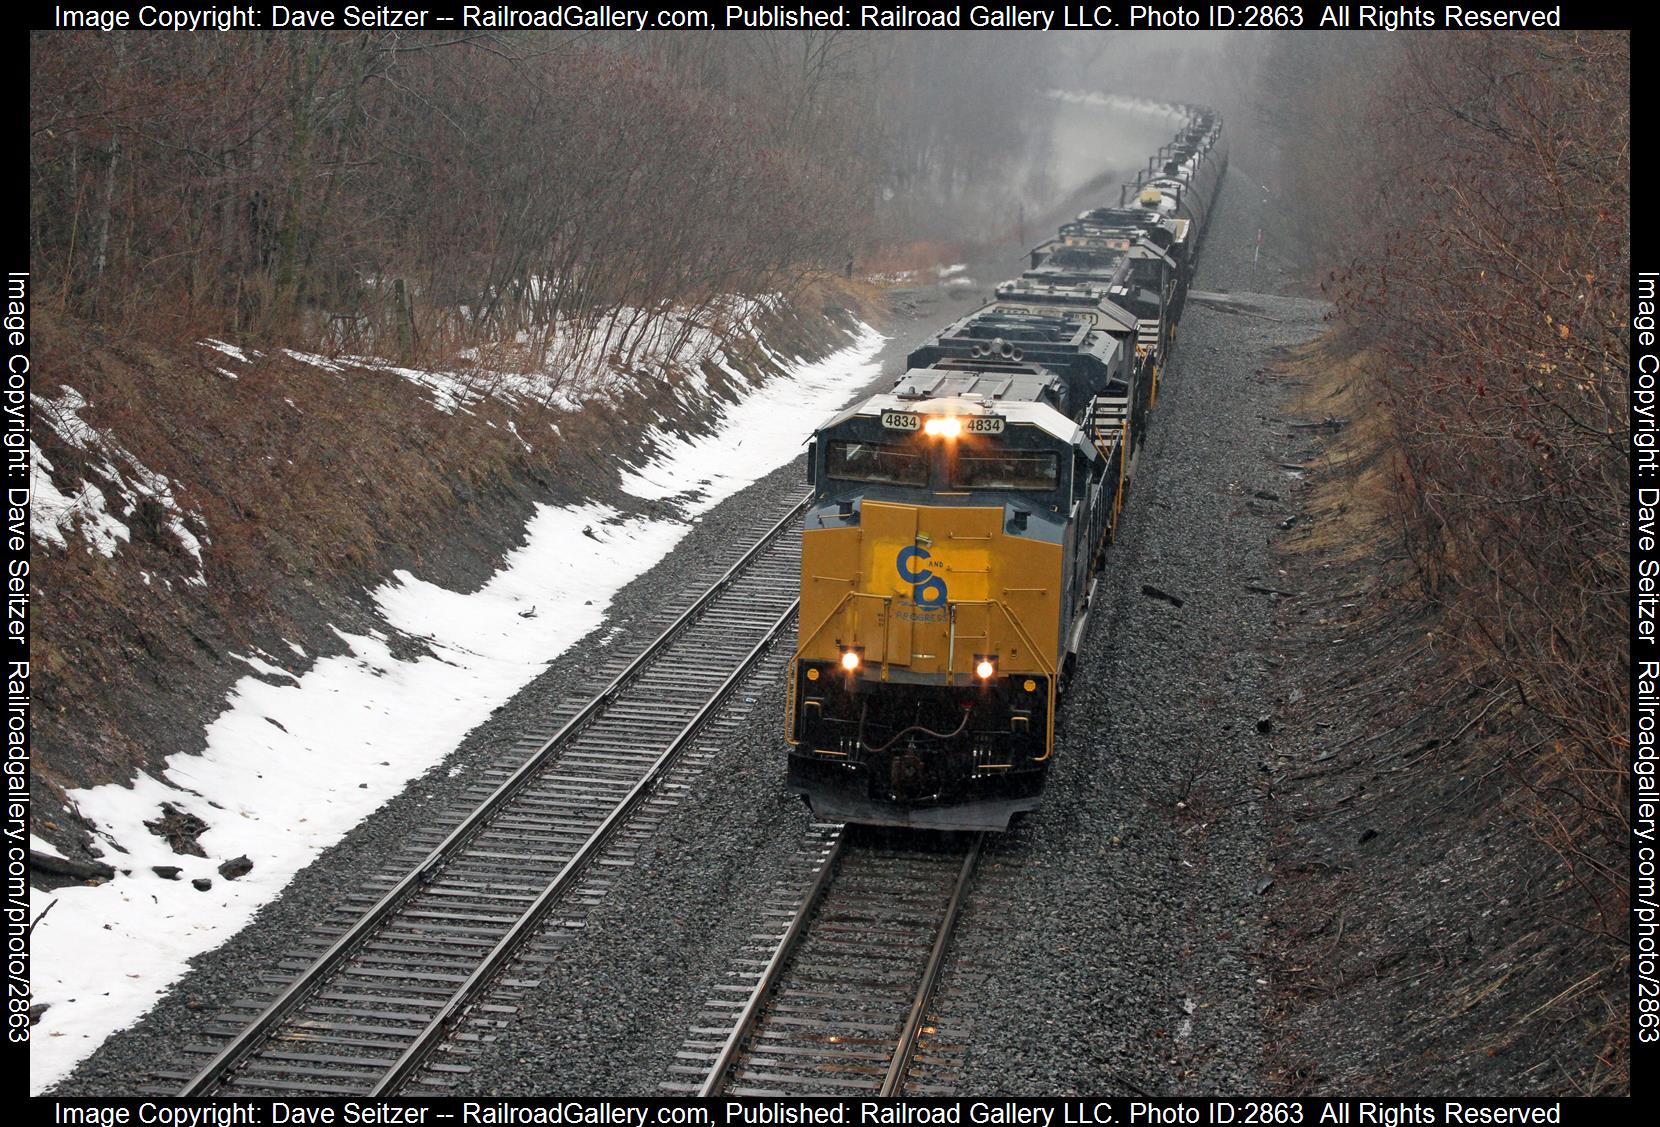 PRLX 4843 is a class SD70ACe and  is pictured in Linden, New York, United States.  This was taken along the Southern Tier on the Norfolk Southern. Photo Copyright: Dave Seitzer uploaded to Railroad Gallery on 01/04/2024. This photograph of PRLX 4843 was taken on Thursday, March 29, 2018. All Rights Reserved. 